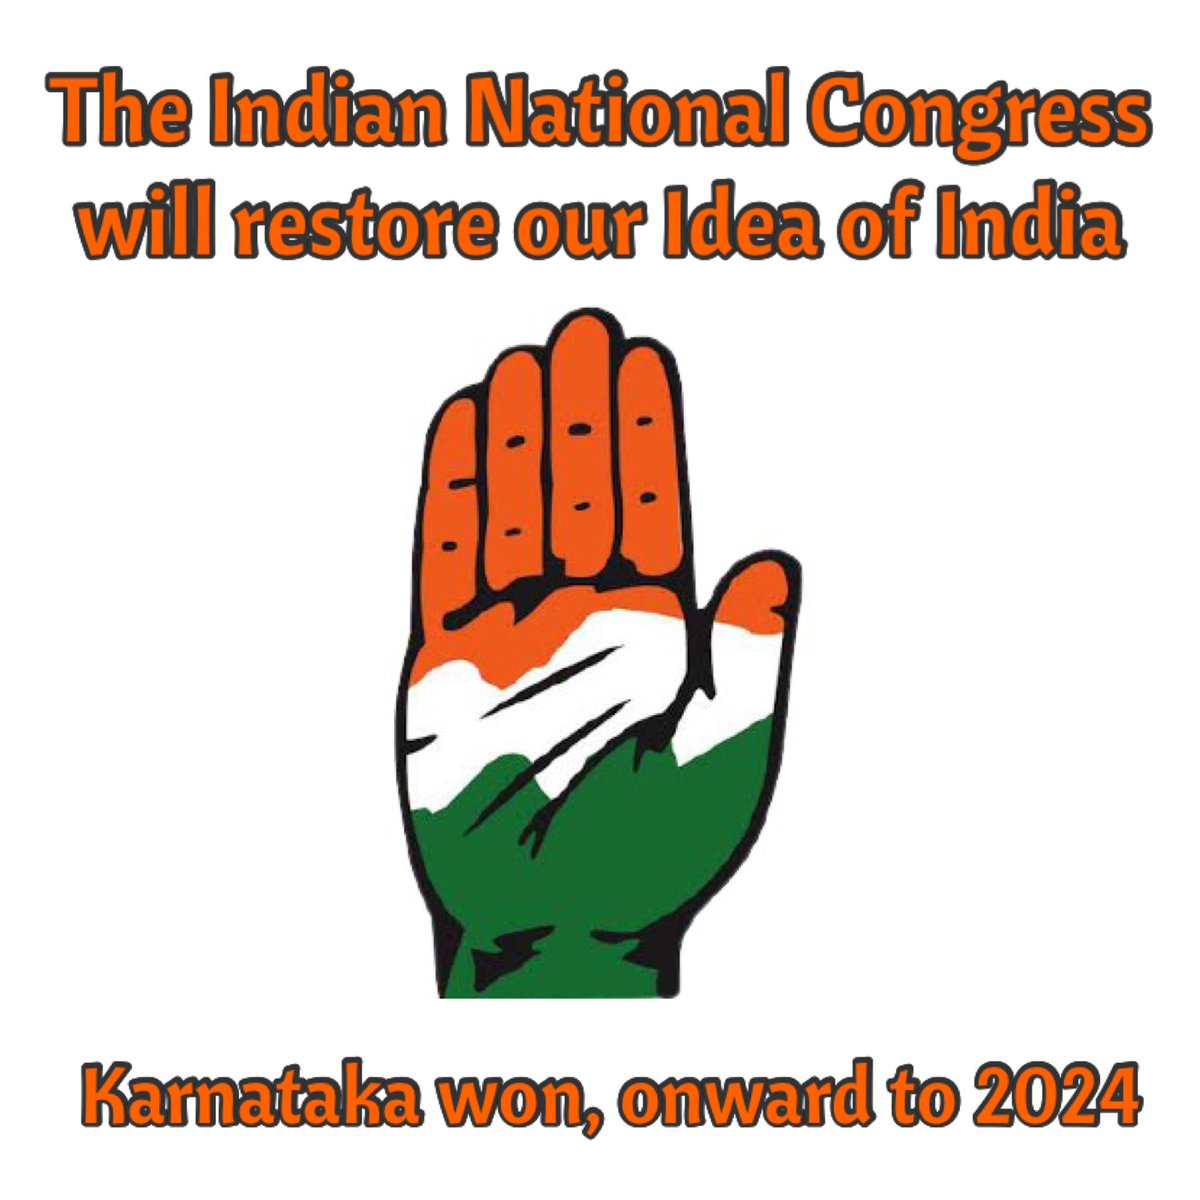 2024 won’t be easy unless the strategy that got the #KarnatakaElectionResults is replicated pan India, modified to each State’s needs.

A 2024 win is the ultimate prize to redeem our #IdeaOfIndia

State leaders, SM & ground teams must be armed with strategy to the tiniest detail